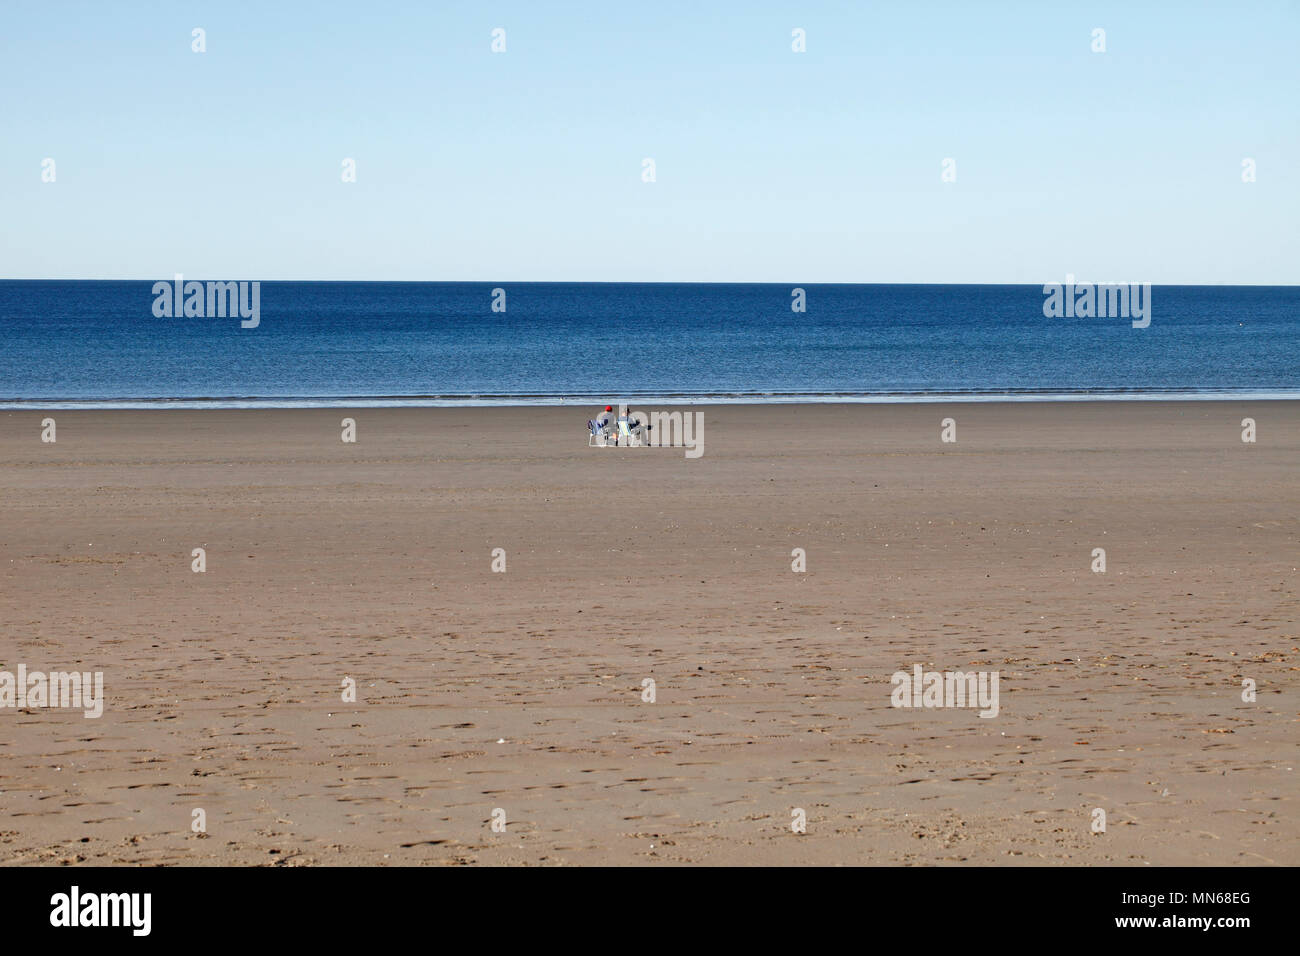 Two people in deckchairs on a Wide open empty beach at Puerto Madryn, Chubut Province, Argentina. Stock Photo